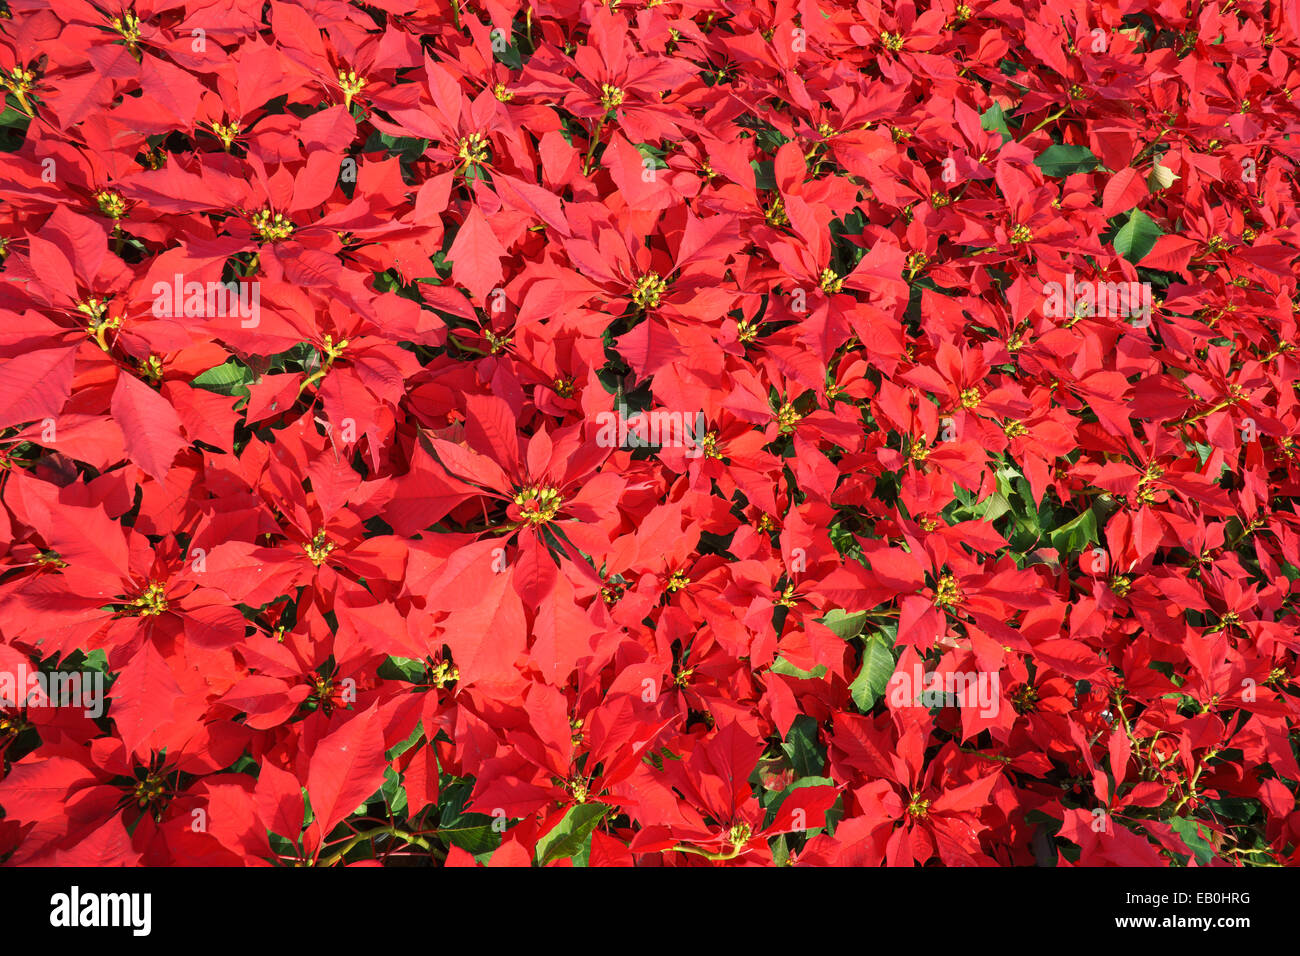 vivid red color poinsetia flowers in a field Stock Photo